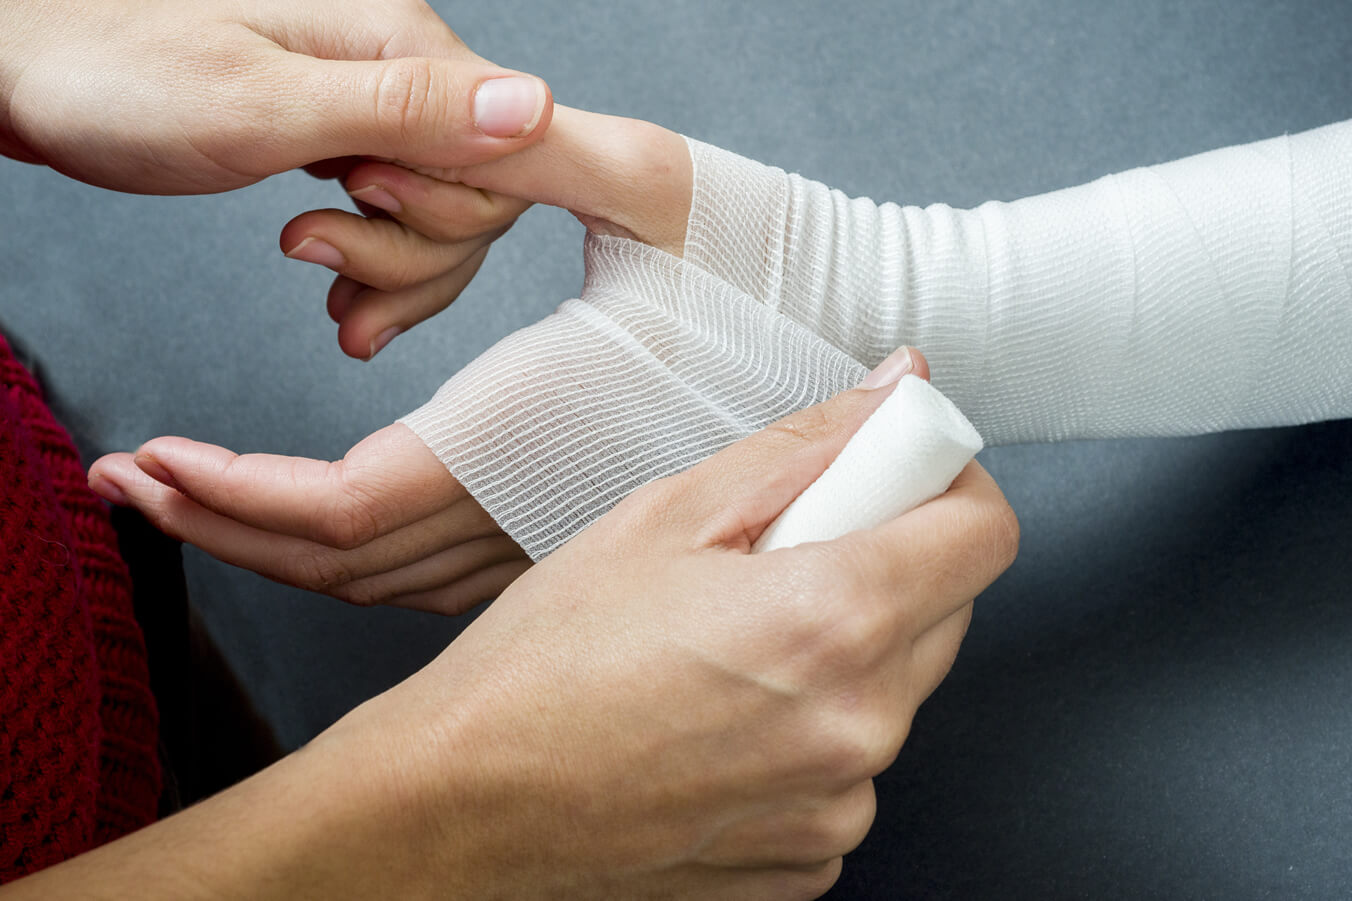 Our hand therapists specialize in the rehabilitation of hand, wrist, elbow shoulder injuries, including sprains and strains.